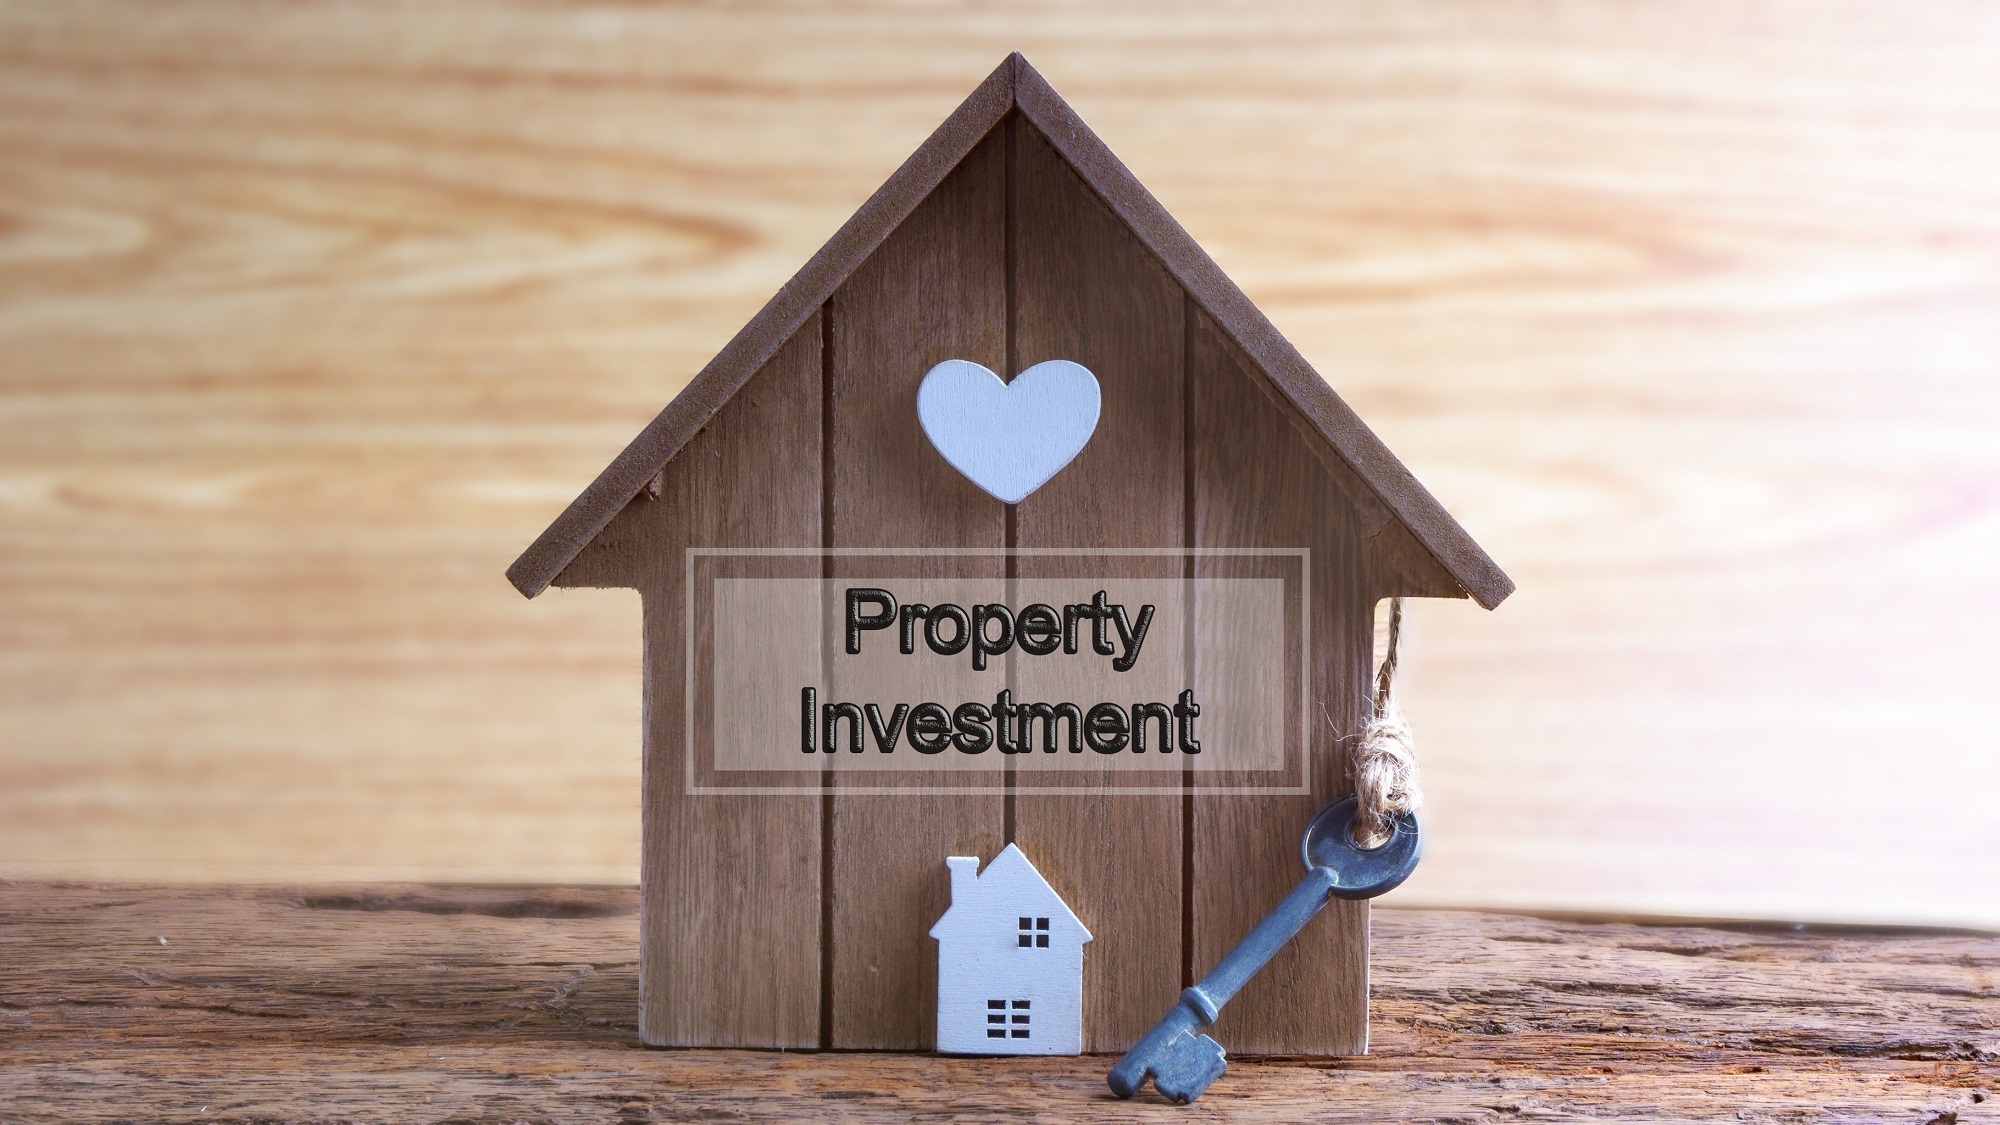 8 Reliable Sources To Learn About Investment Property